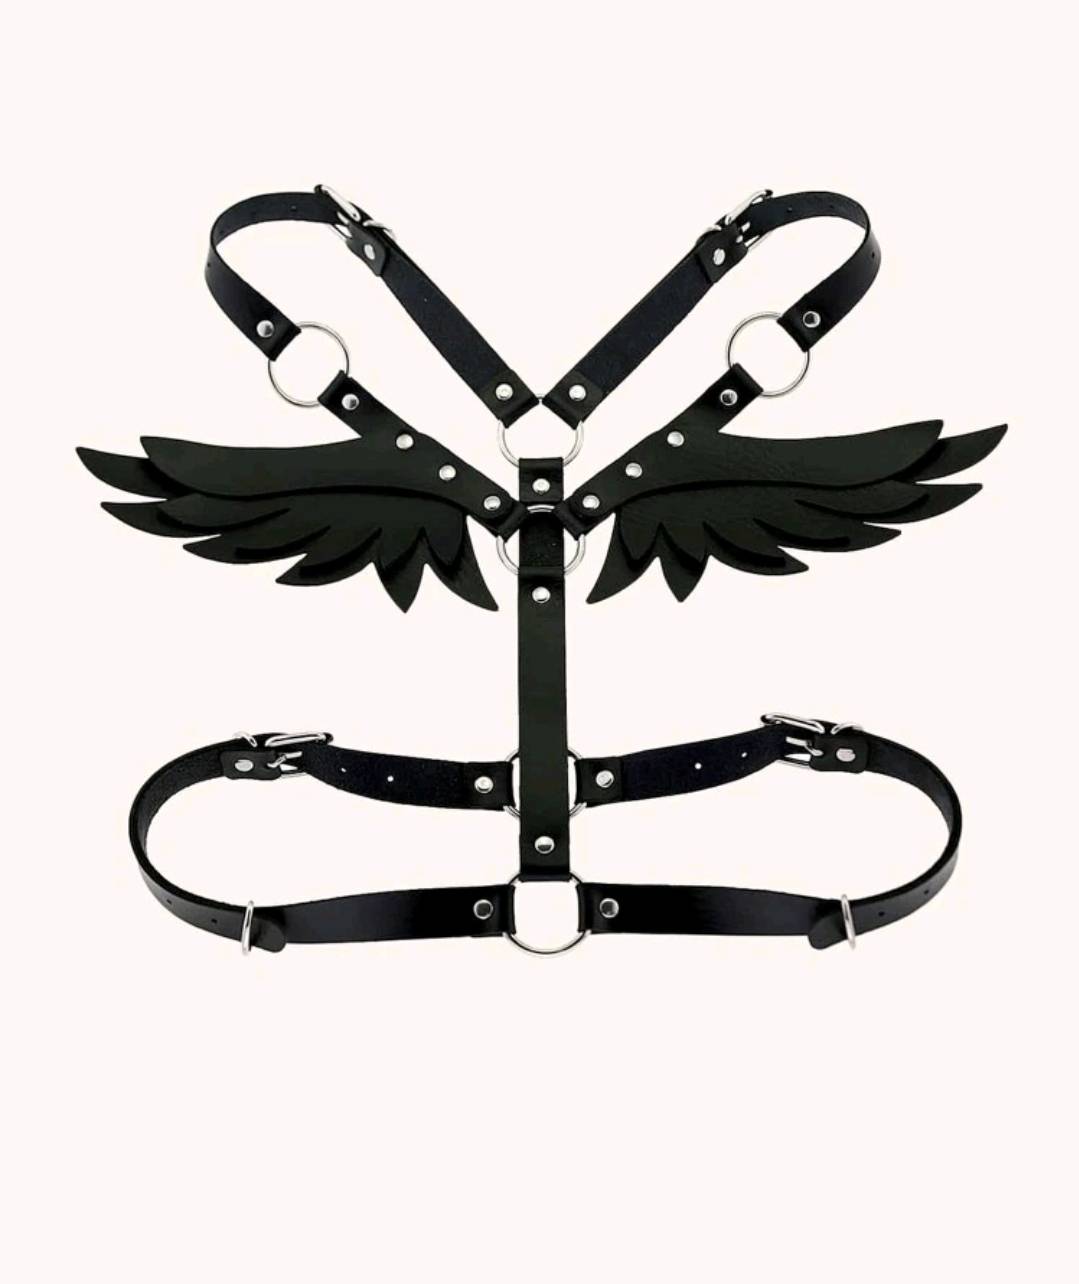 Elevate your style with our Wing Decor Costume Harness Belt in striking black. Crafted from high-quality PU leather with a composition of 100% Polyurethane, this accessory is a must-have for fashion enthusiasts. The intelligent design features intricate wing decor, adding a touch of mystique to your ensemble. Whether for cosplay, themed events, or enhancing your everyday look, this harness belt is the perfect blend of edgy and elegant. Make a bold fashion statement with this versatile and captivating accessory.